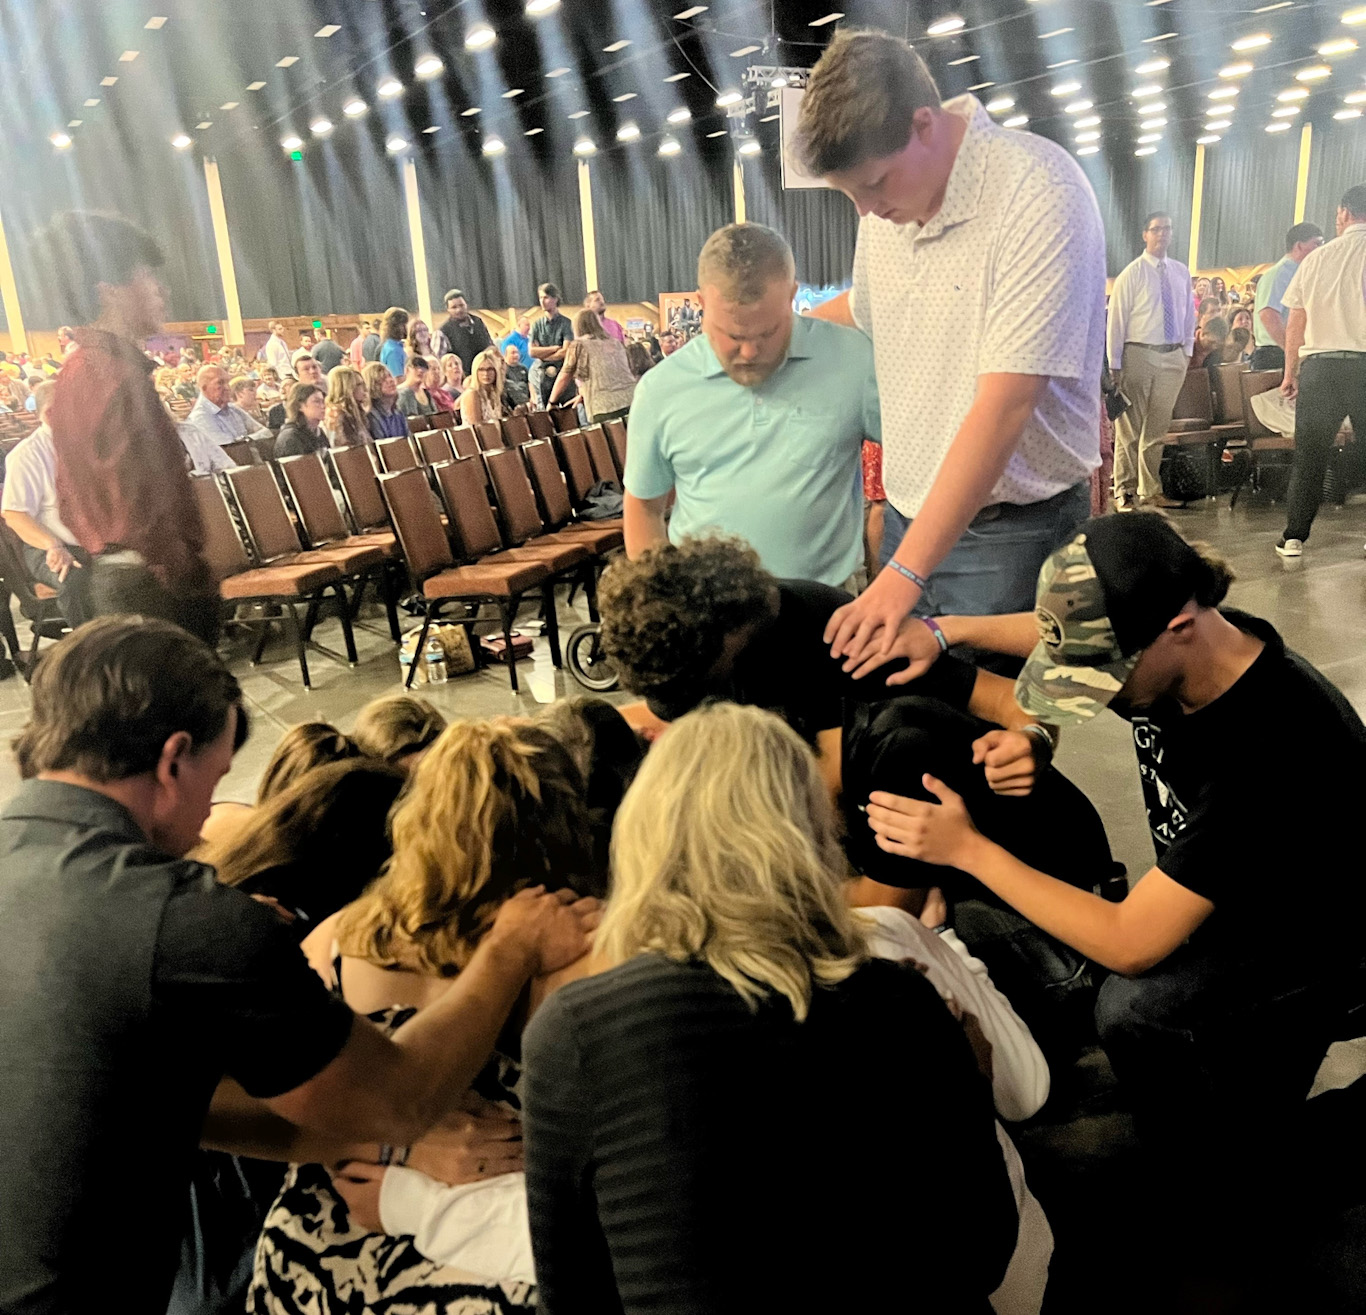 Young people pray for one another at youth event